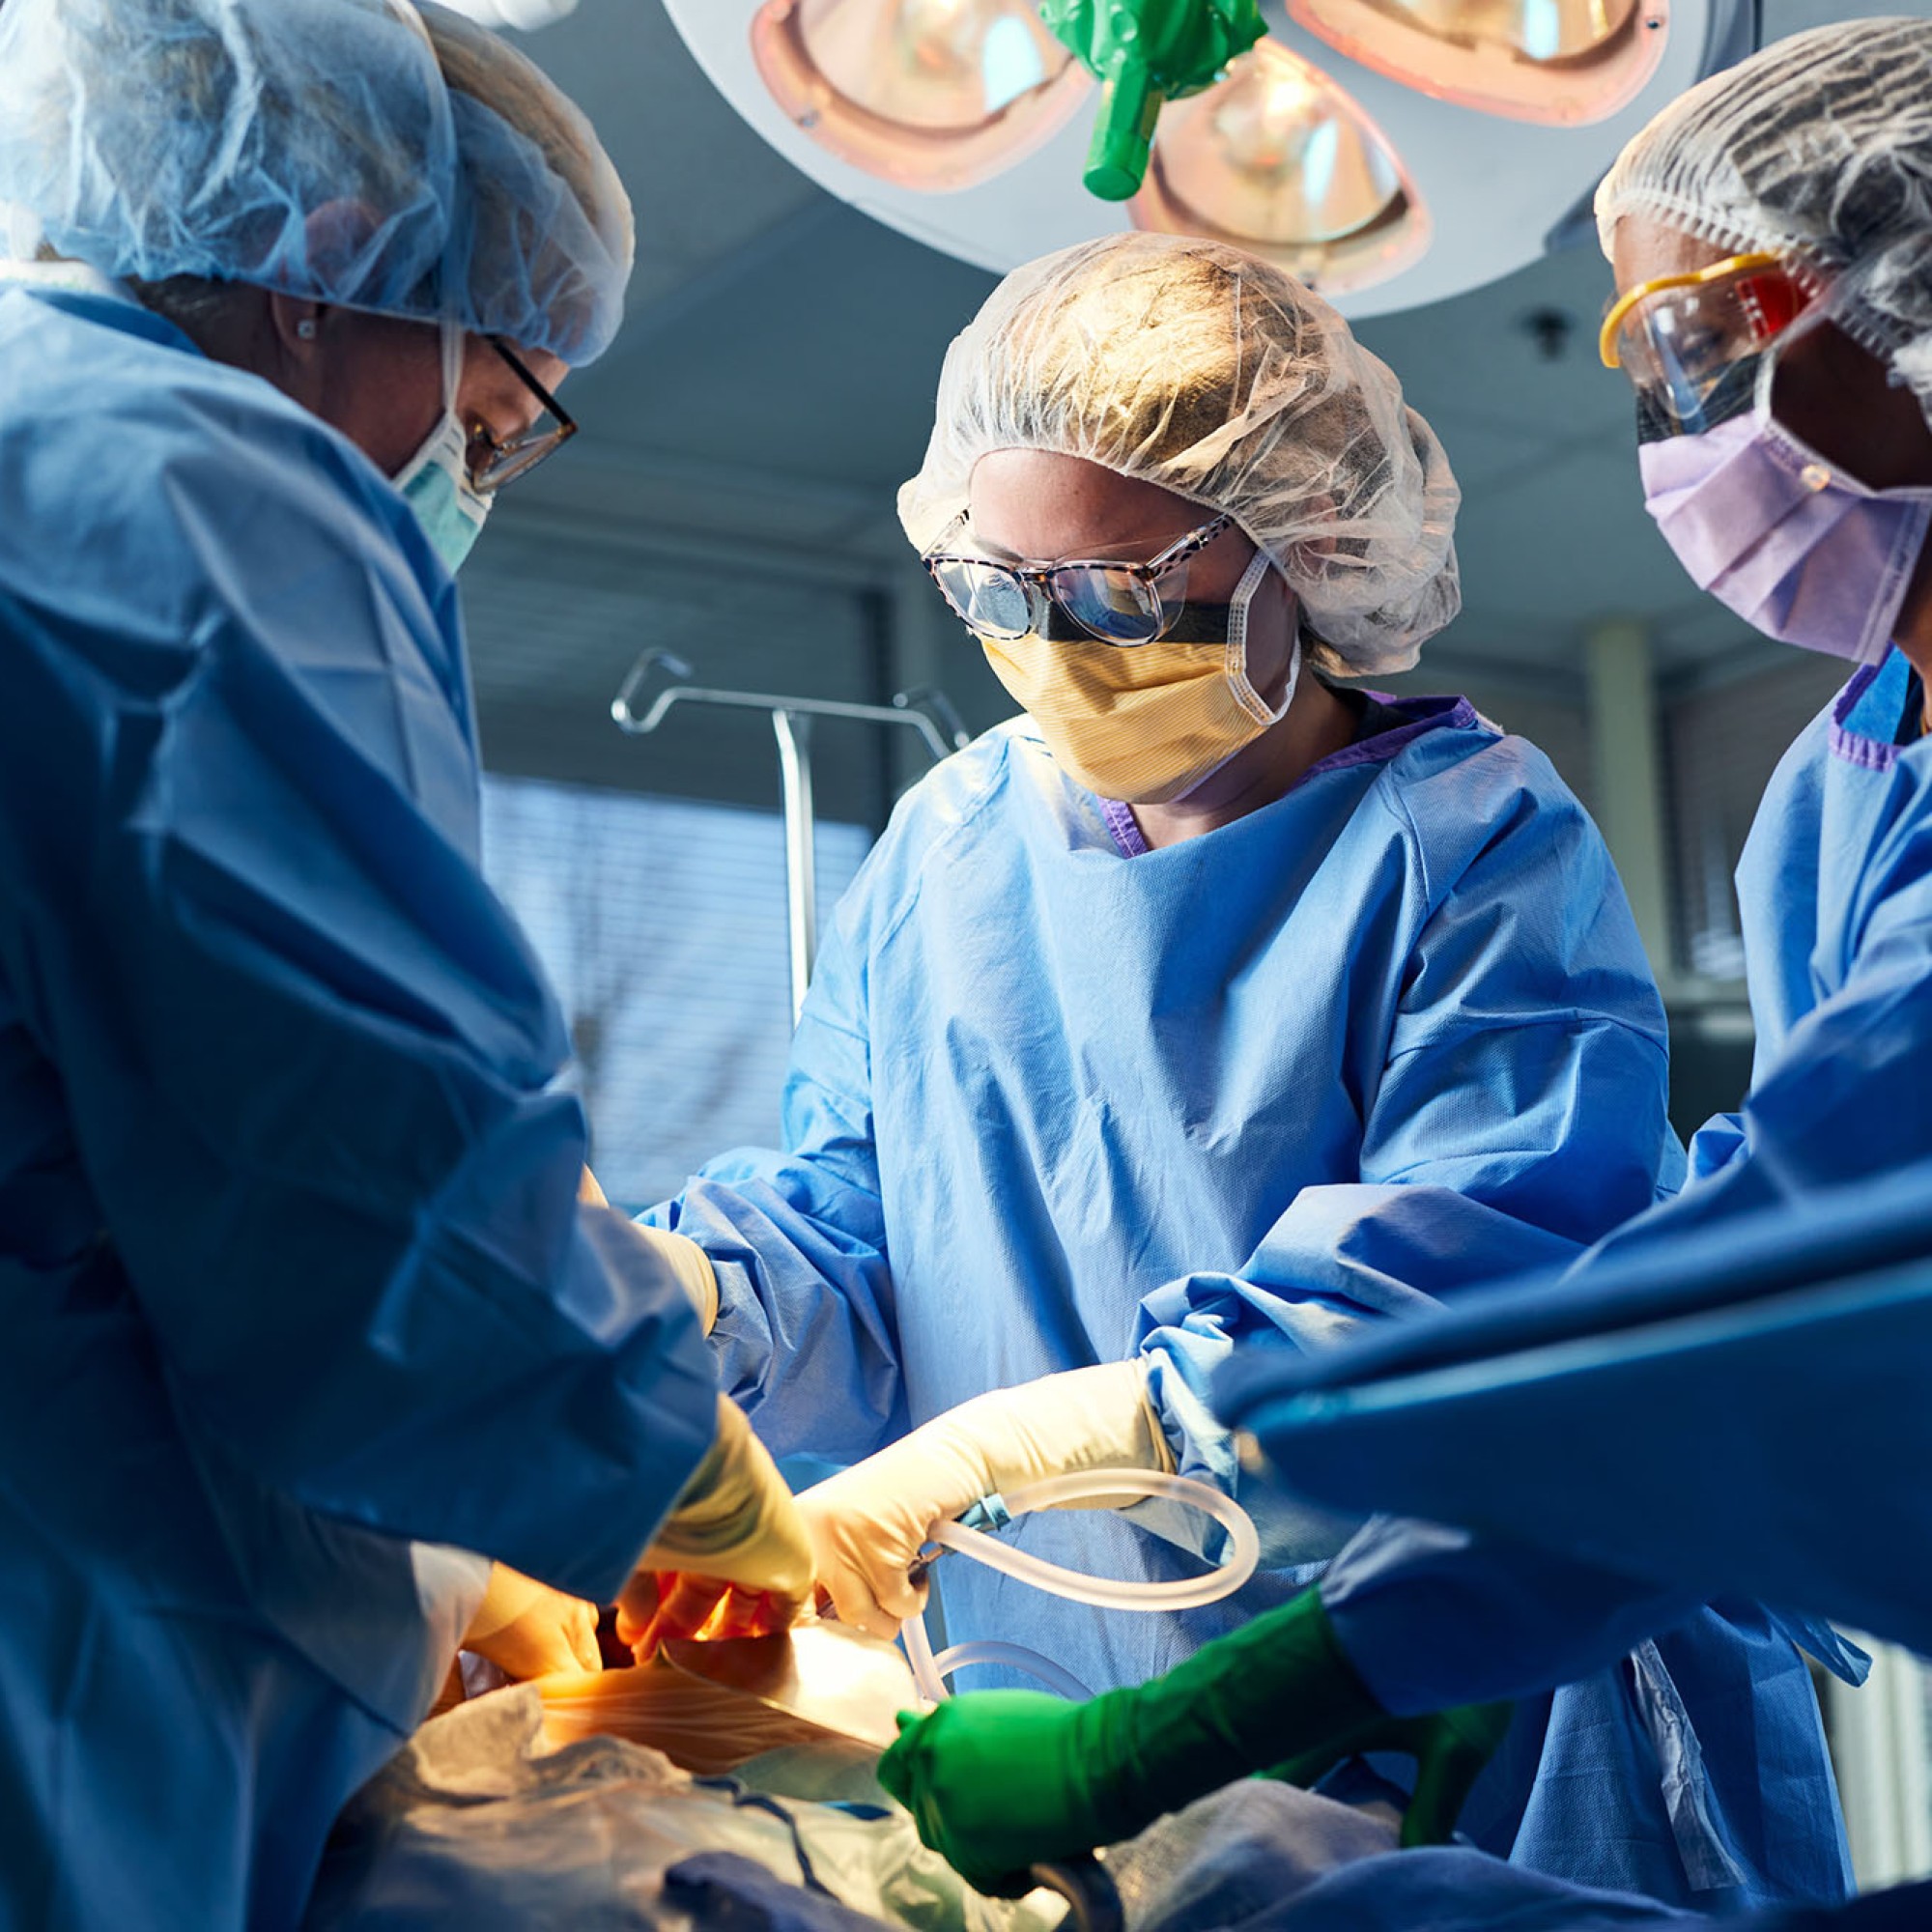 Surgical technicians assist during a medical surgical procedure.